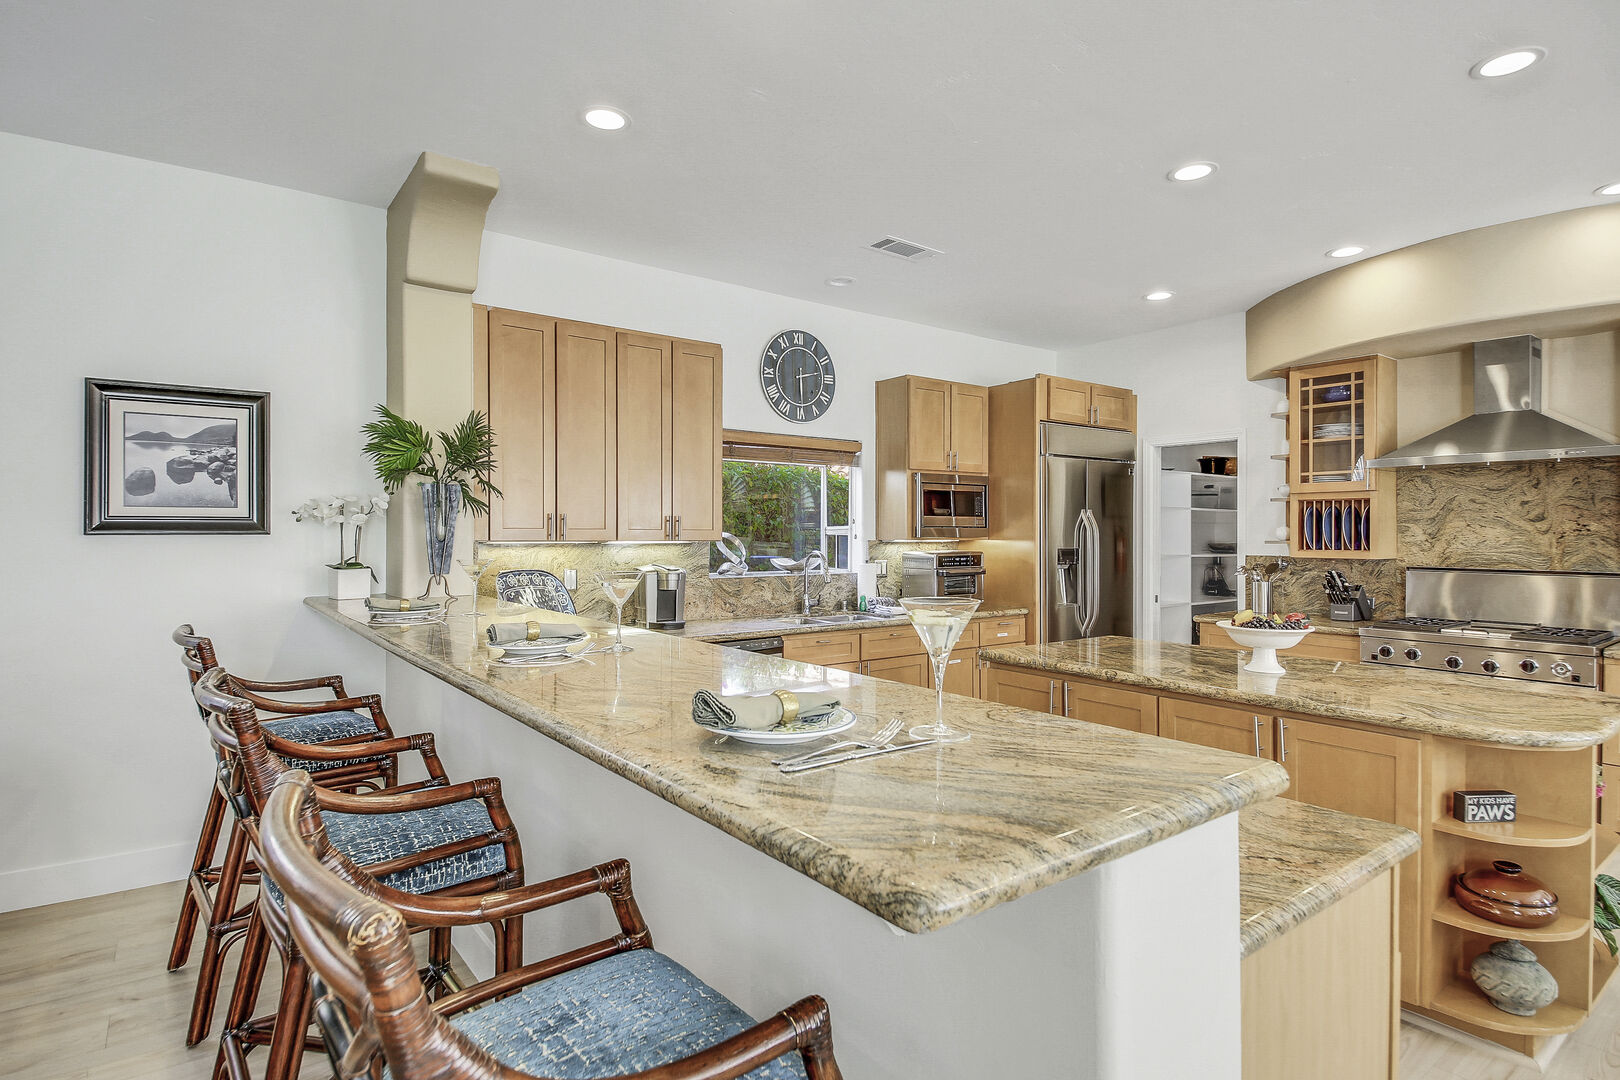 The granite countertops include bar height dining with seating for three.